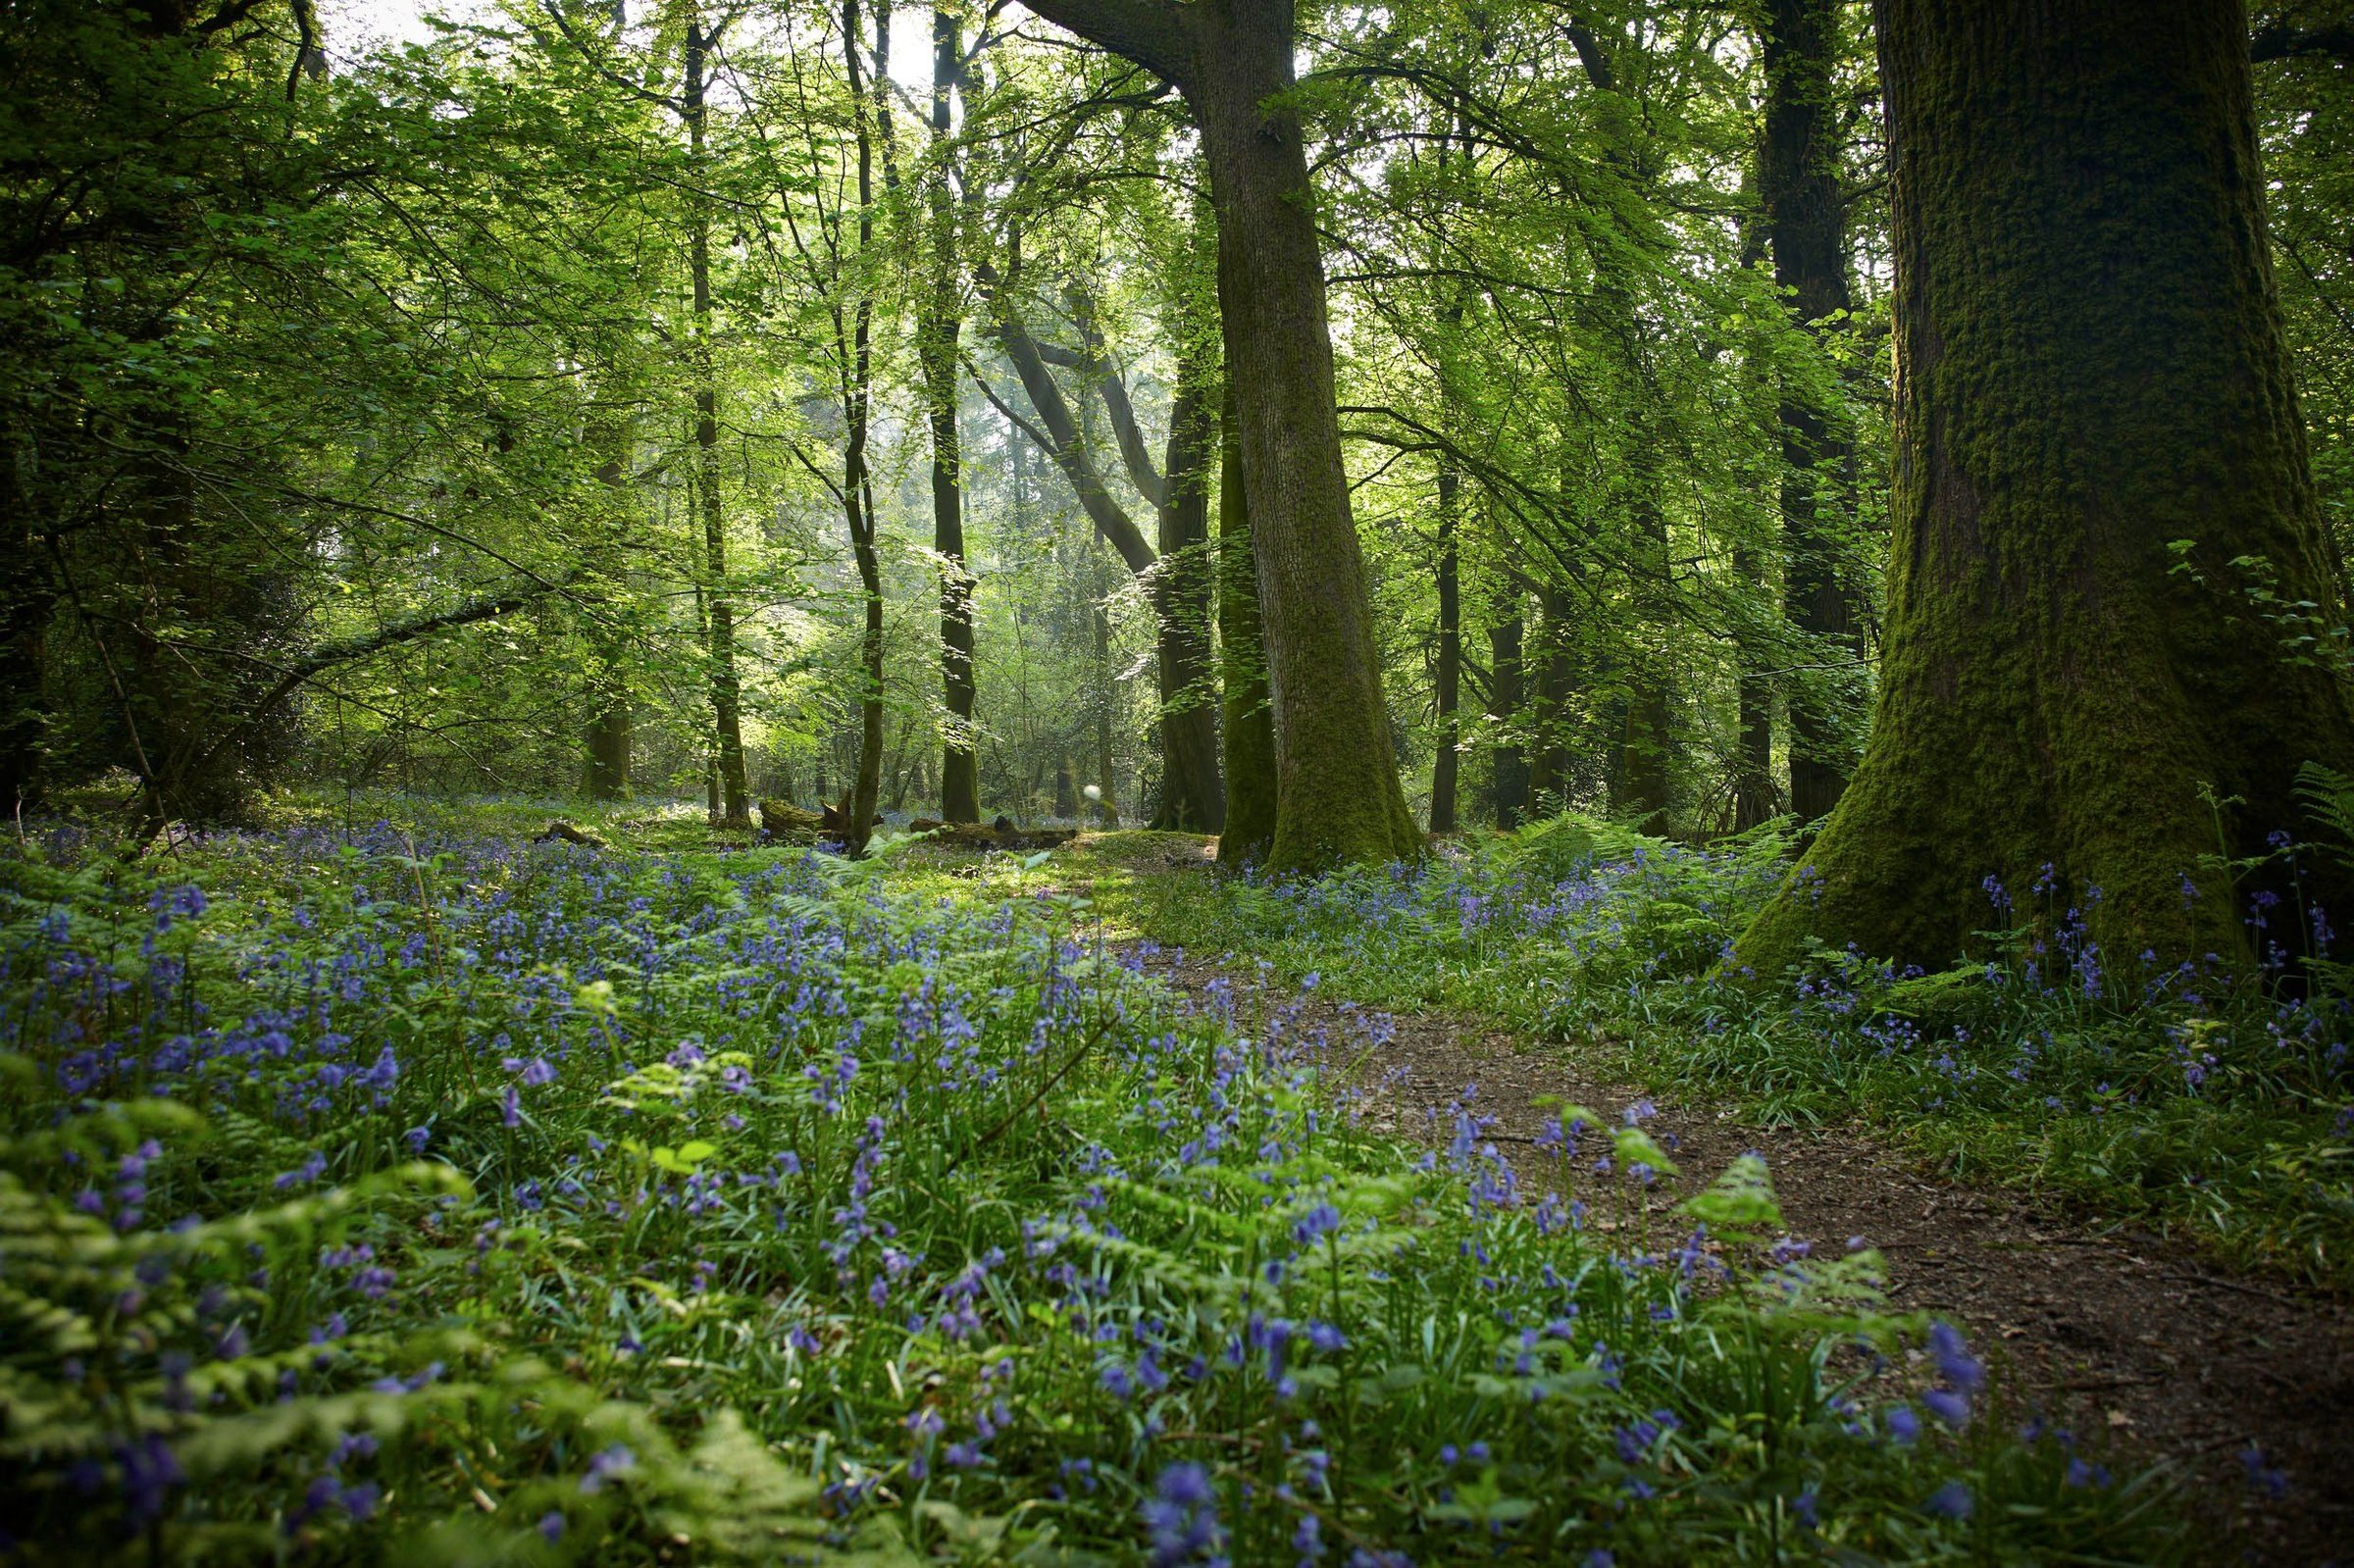 Experience the bluebells in Hampshire